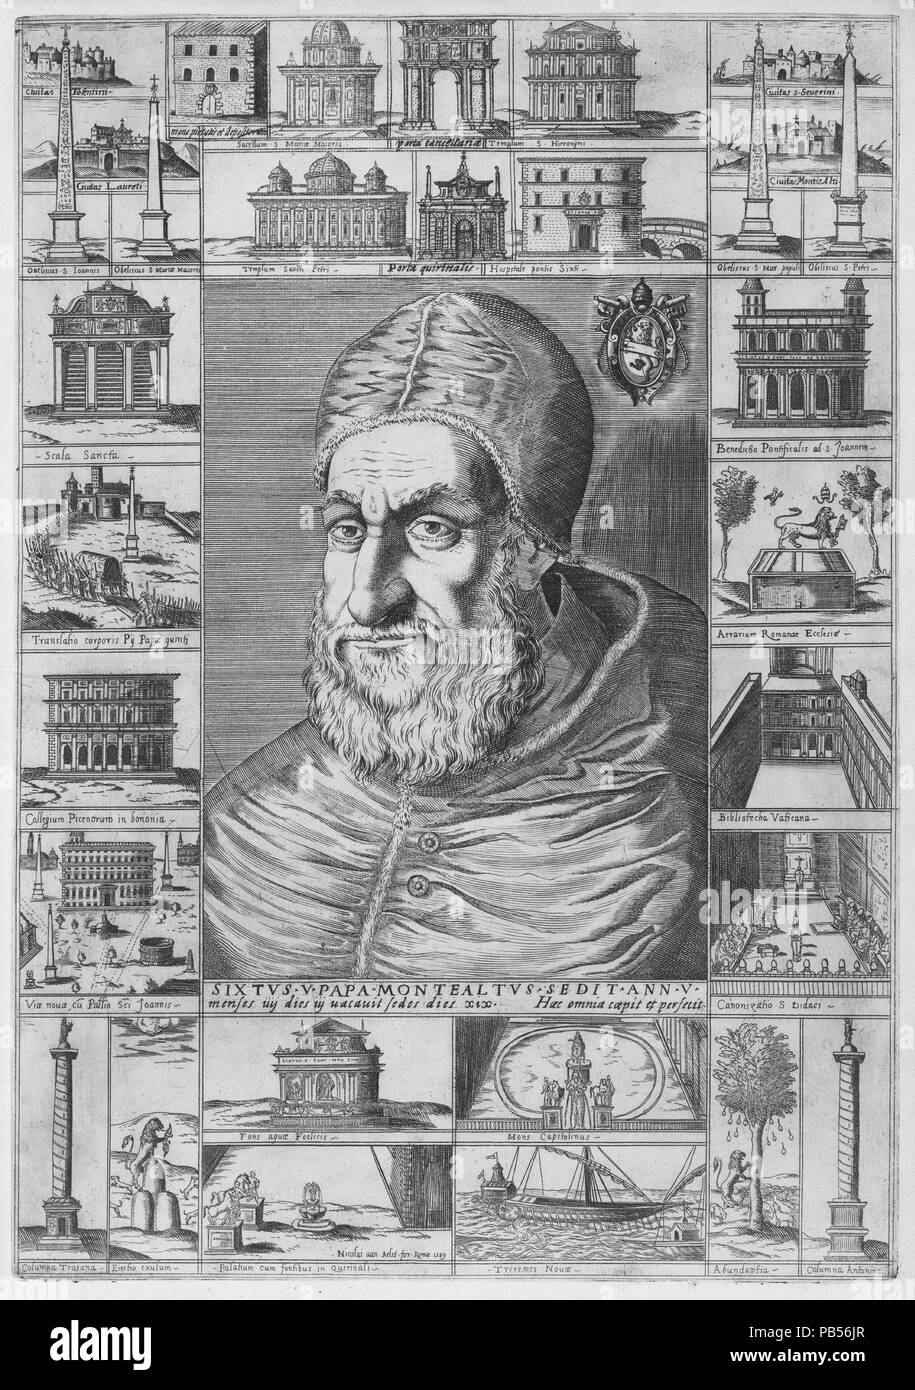 Portrait of Sixtus V. Dimensions: plate: 20 1/16 x 14 in. (50.9 x 35.5 cm)  sheet: 21 3/16 x 16 5/16 in. (53.8 x 41.5 cm). Publisher: Published by Nicolaus van Aelst (Flemish, Brussels 1526-1613 Rome). Sitter: Portrait of Pope Sixtus V (Felice Peretti) (Italian, Grottamare near Pescara 1520-1590 Rome). Date: ca. 1589. Museum: Metropolitan Museum of Art, New York, USA. Stock Photo